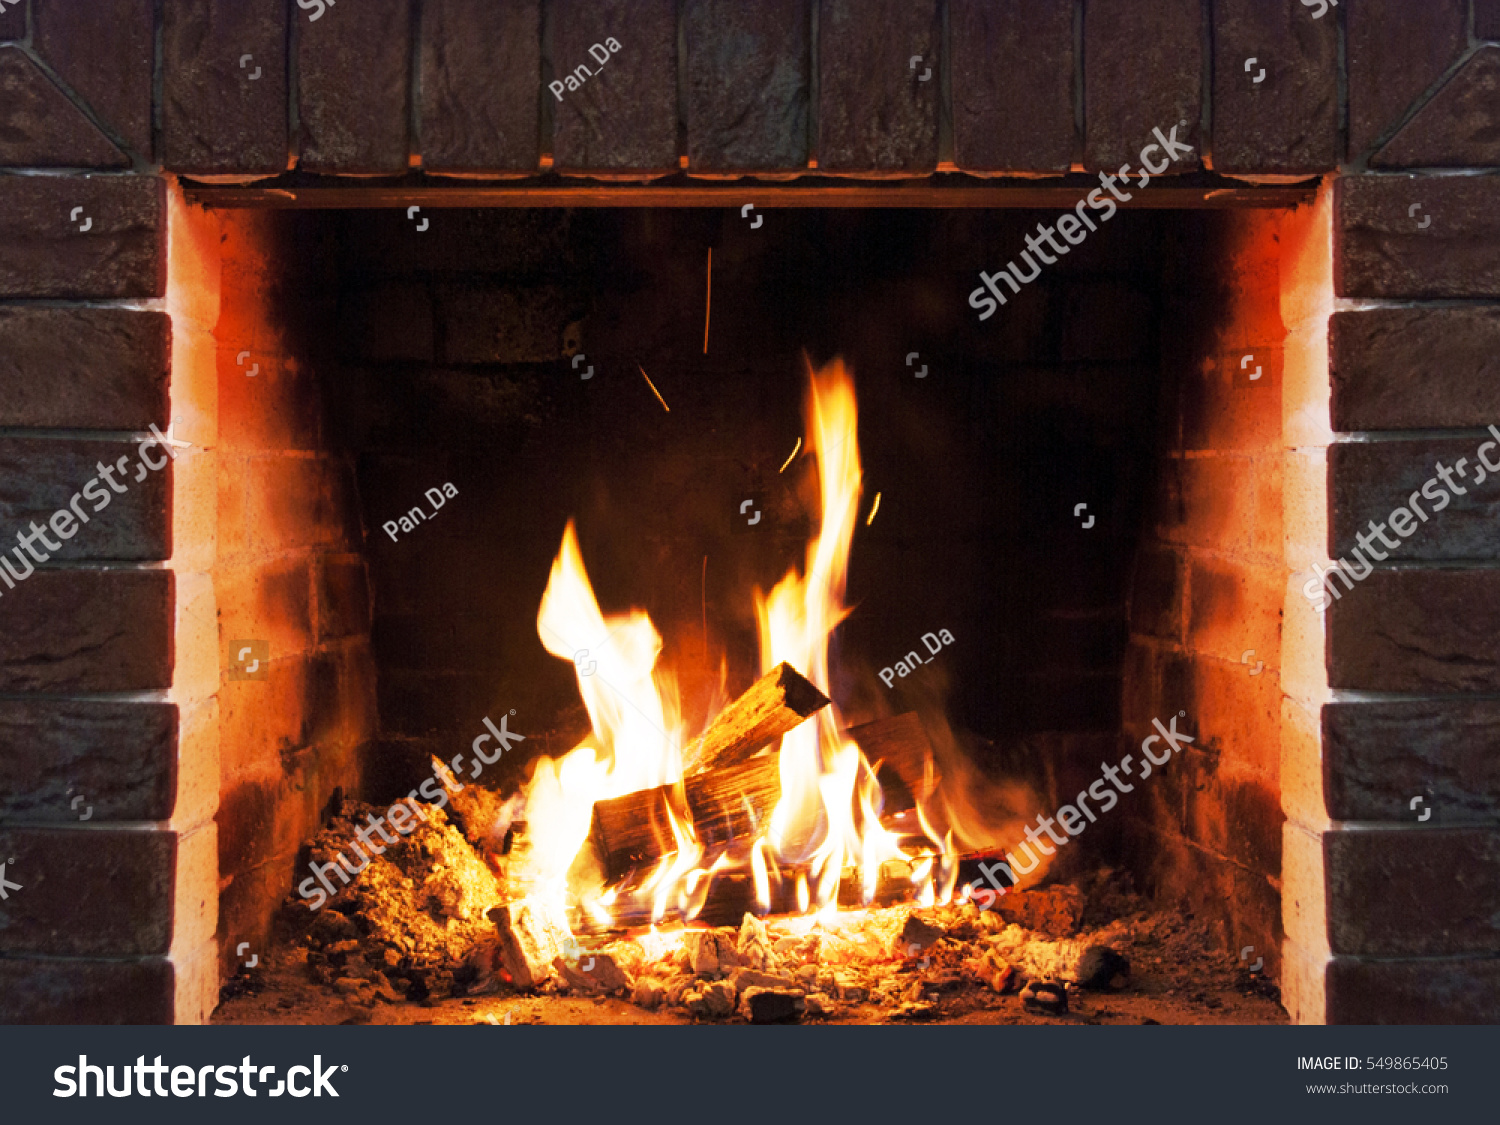 Burning fireplace. Fireplace as a piece of furniture #549865405